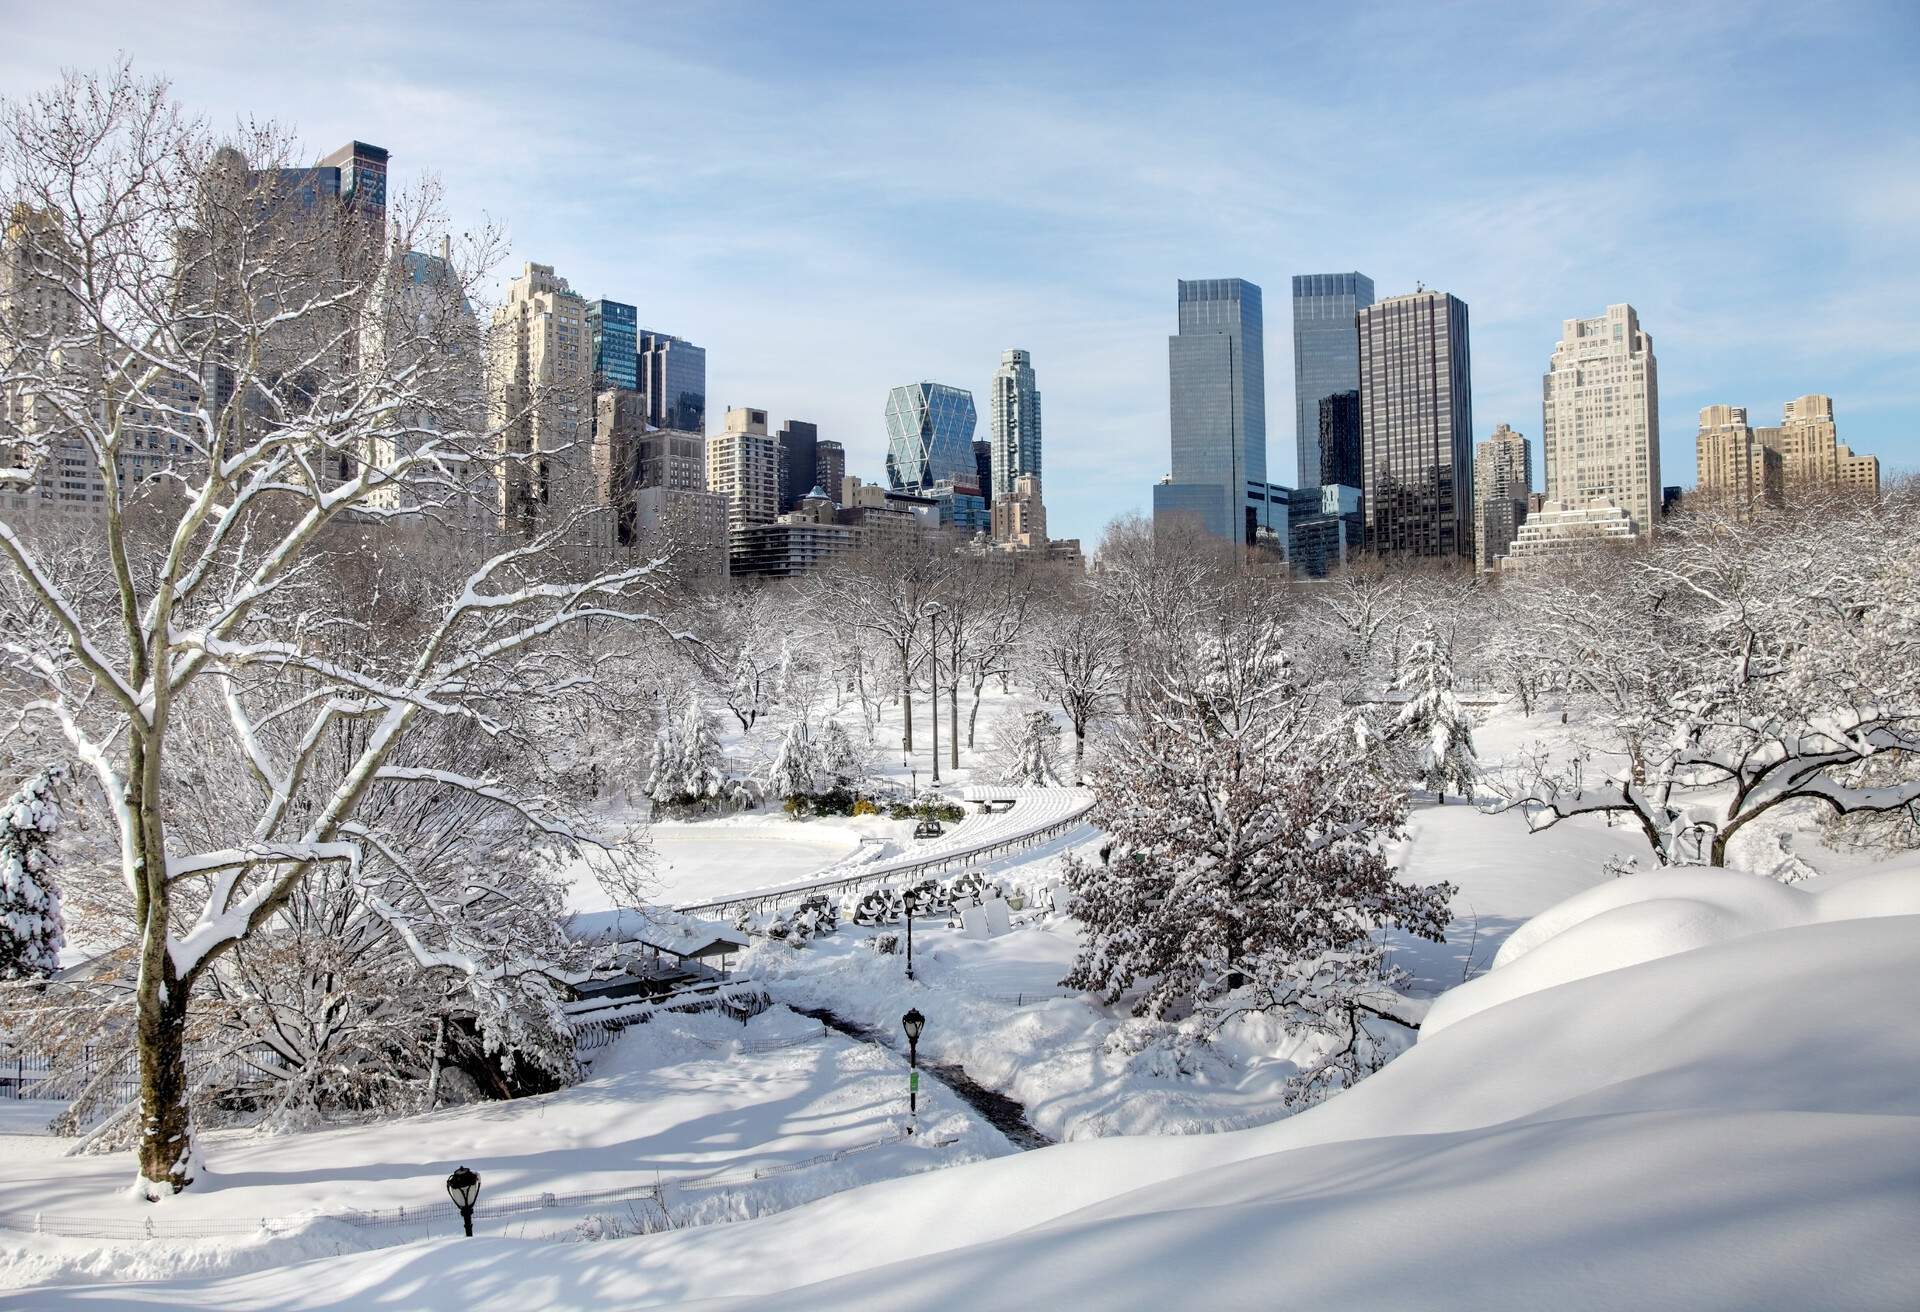 blizzard in New York City turns Central Park into a winter wonderland. Photo taken from a scenic viewpoint showing the Manhatten skyline rising from the snow covered  trees.